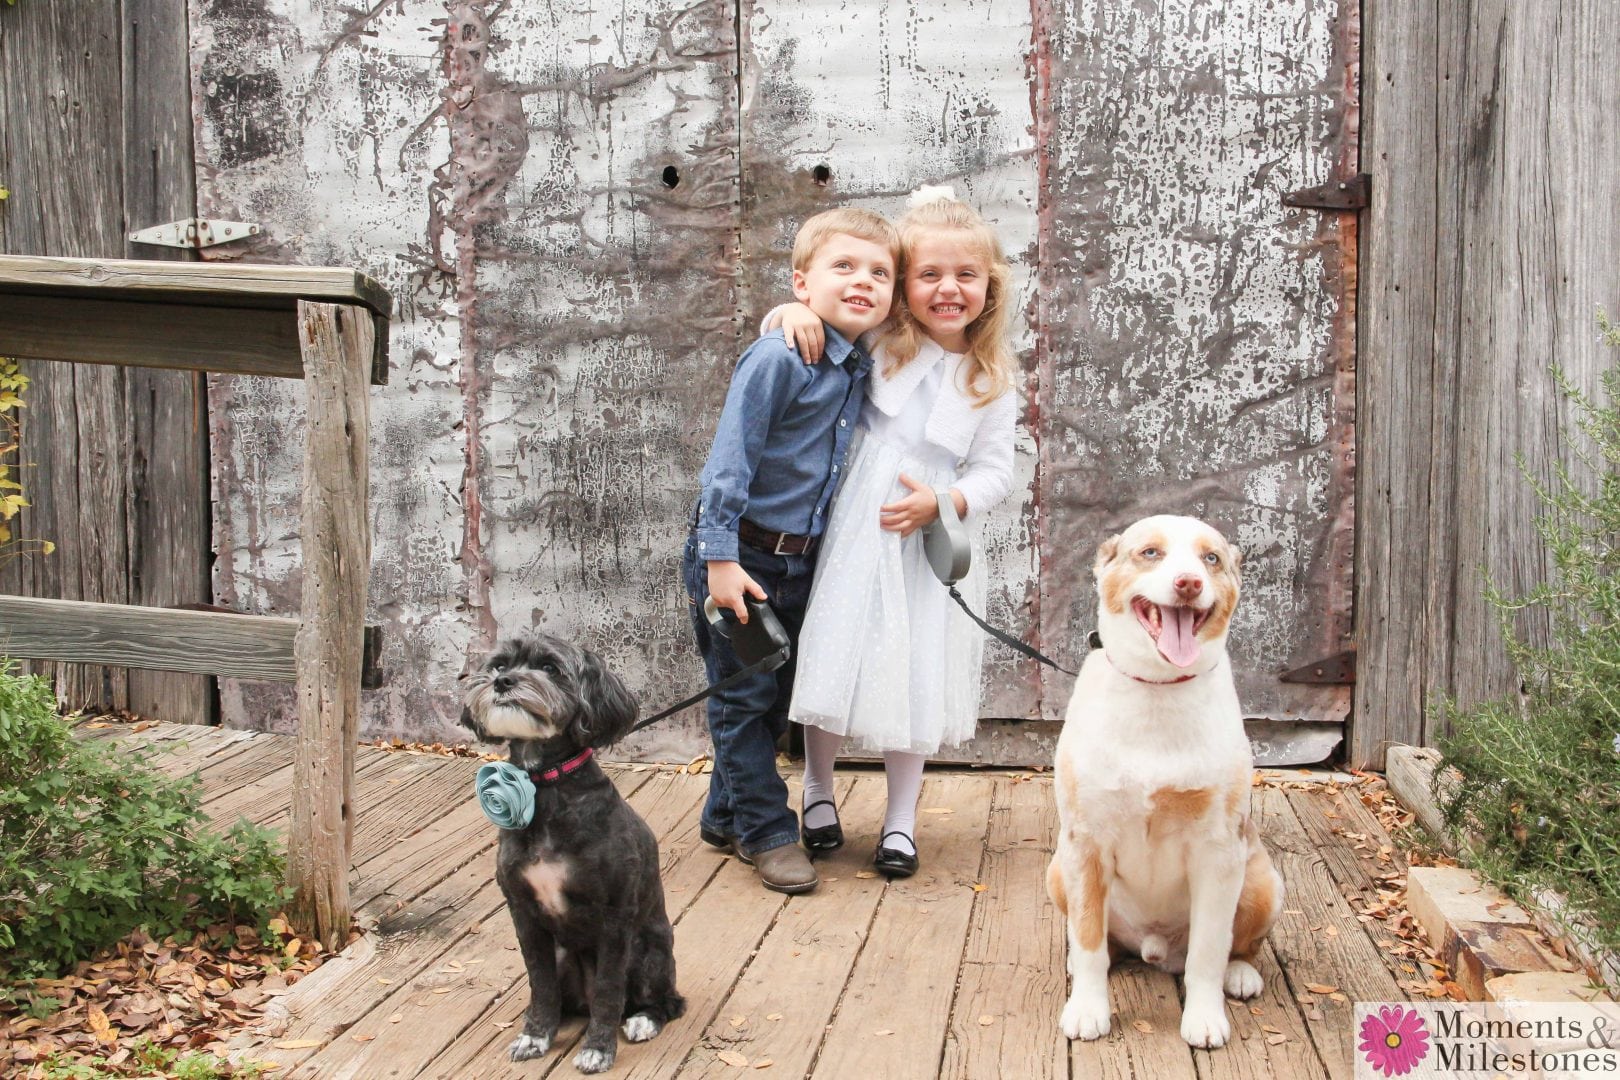 Play Time With the Click Family Photography in Gruene, Texas